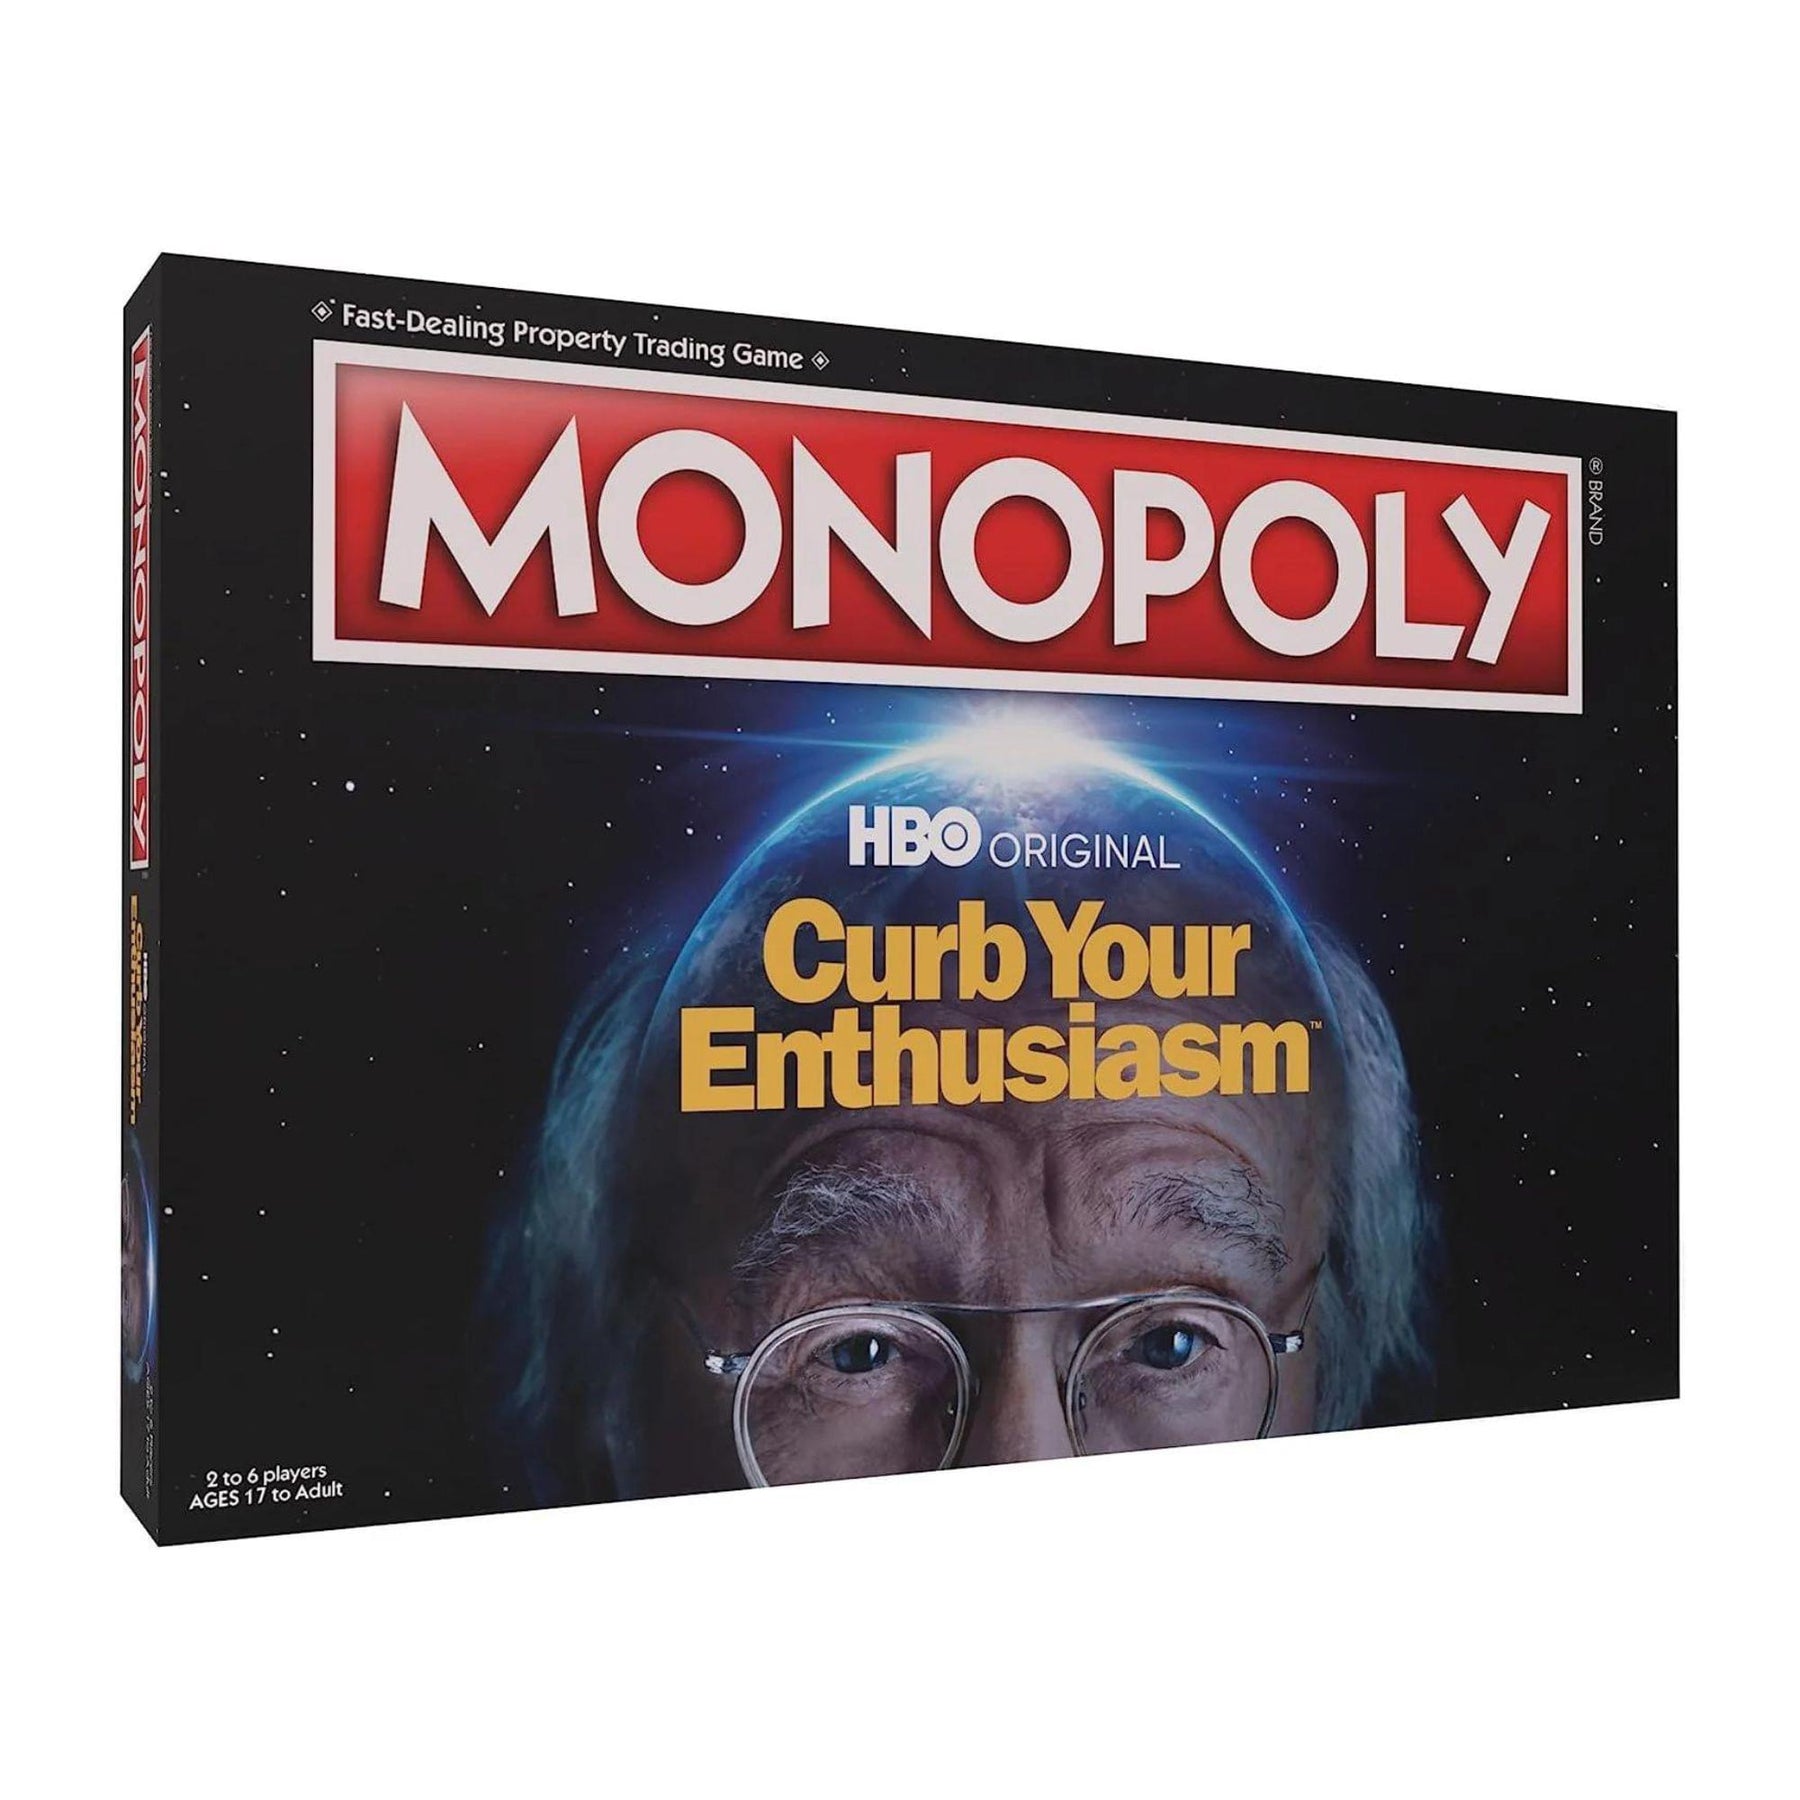 Curb Your Enthusiasm Monopoly Board Game